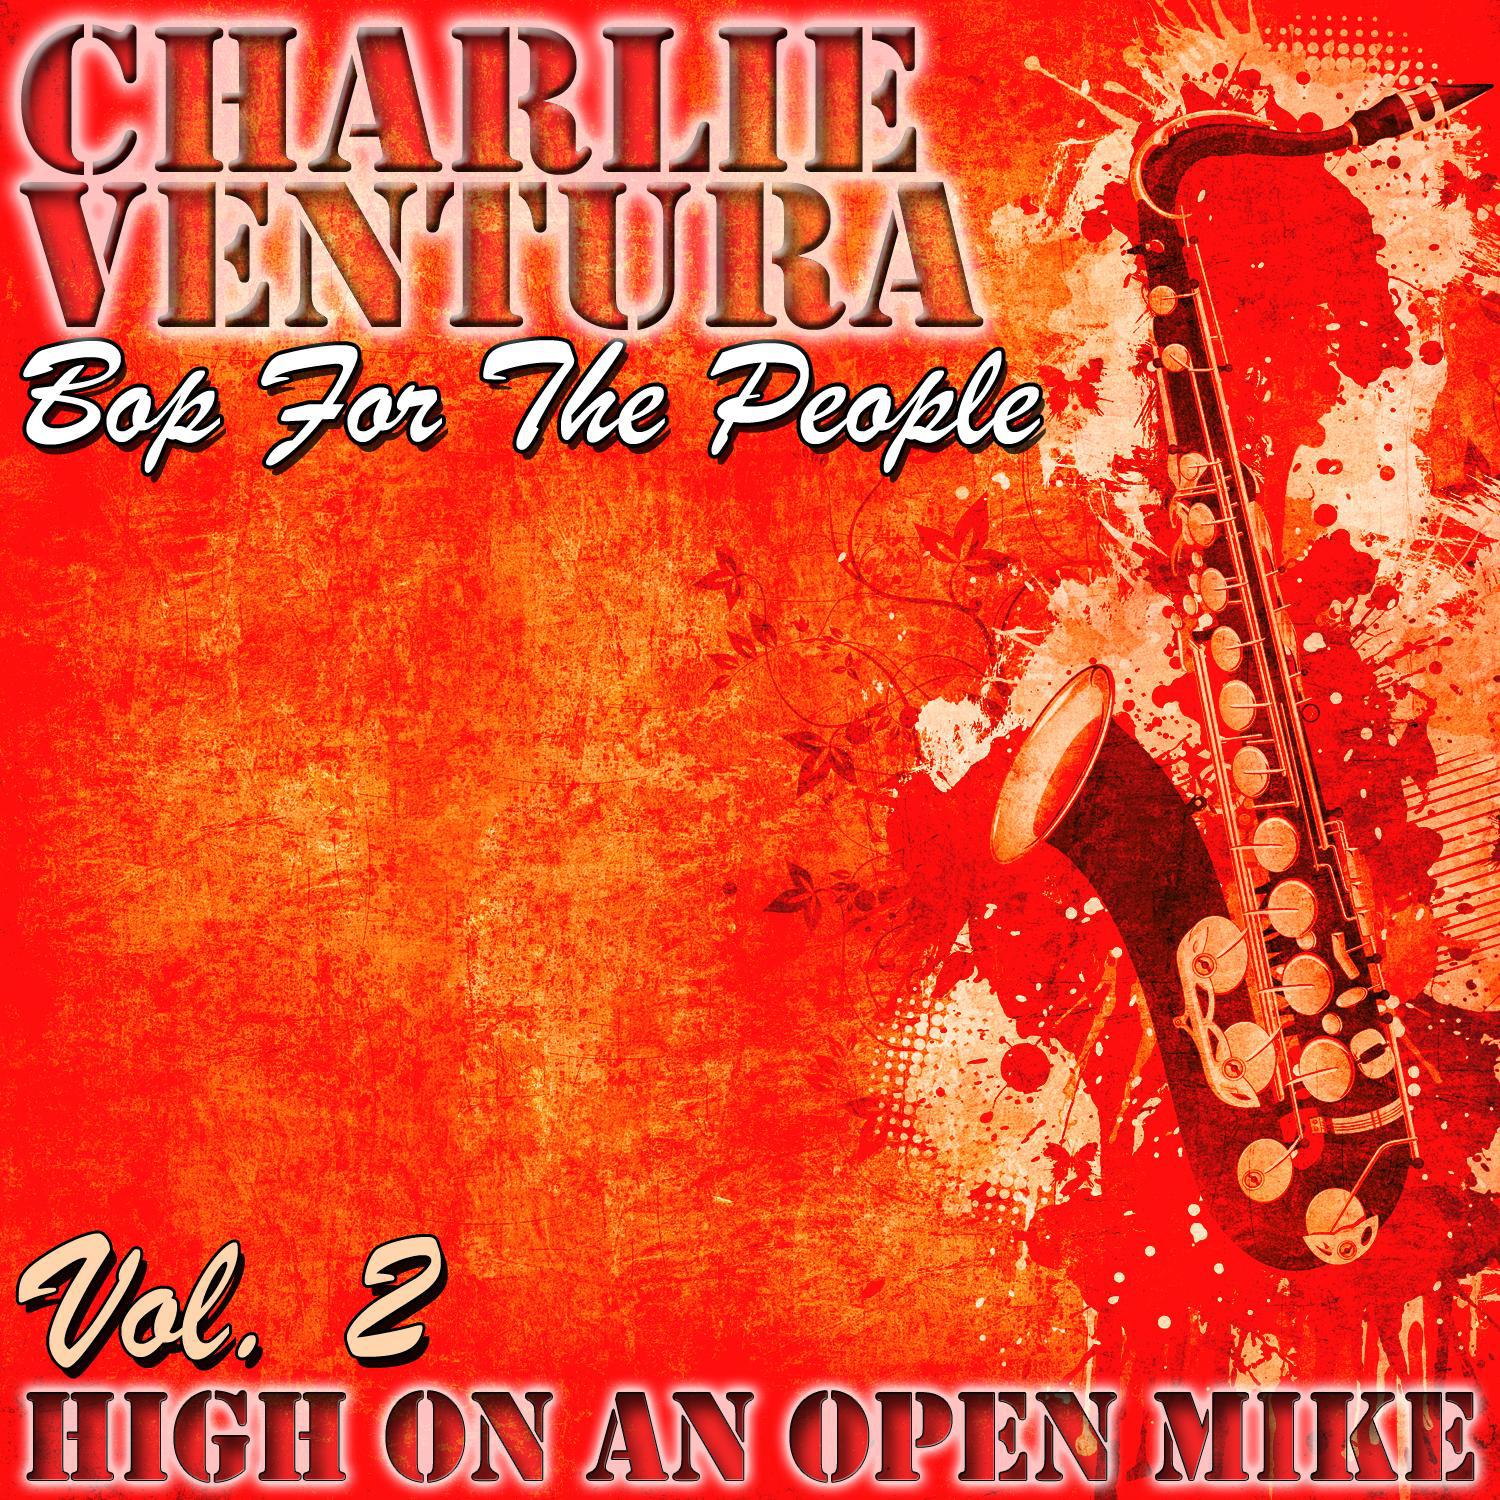 Bop for the People Vol. 2 - High On an Open Mike